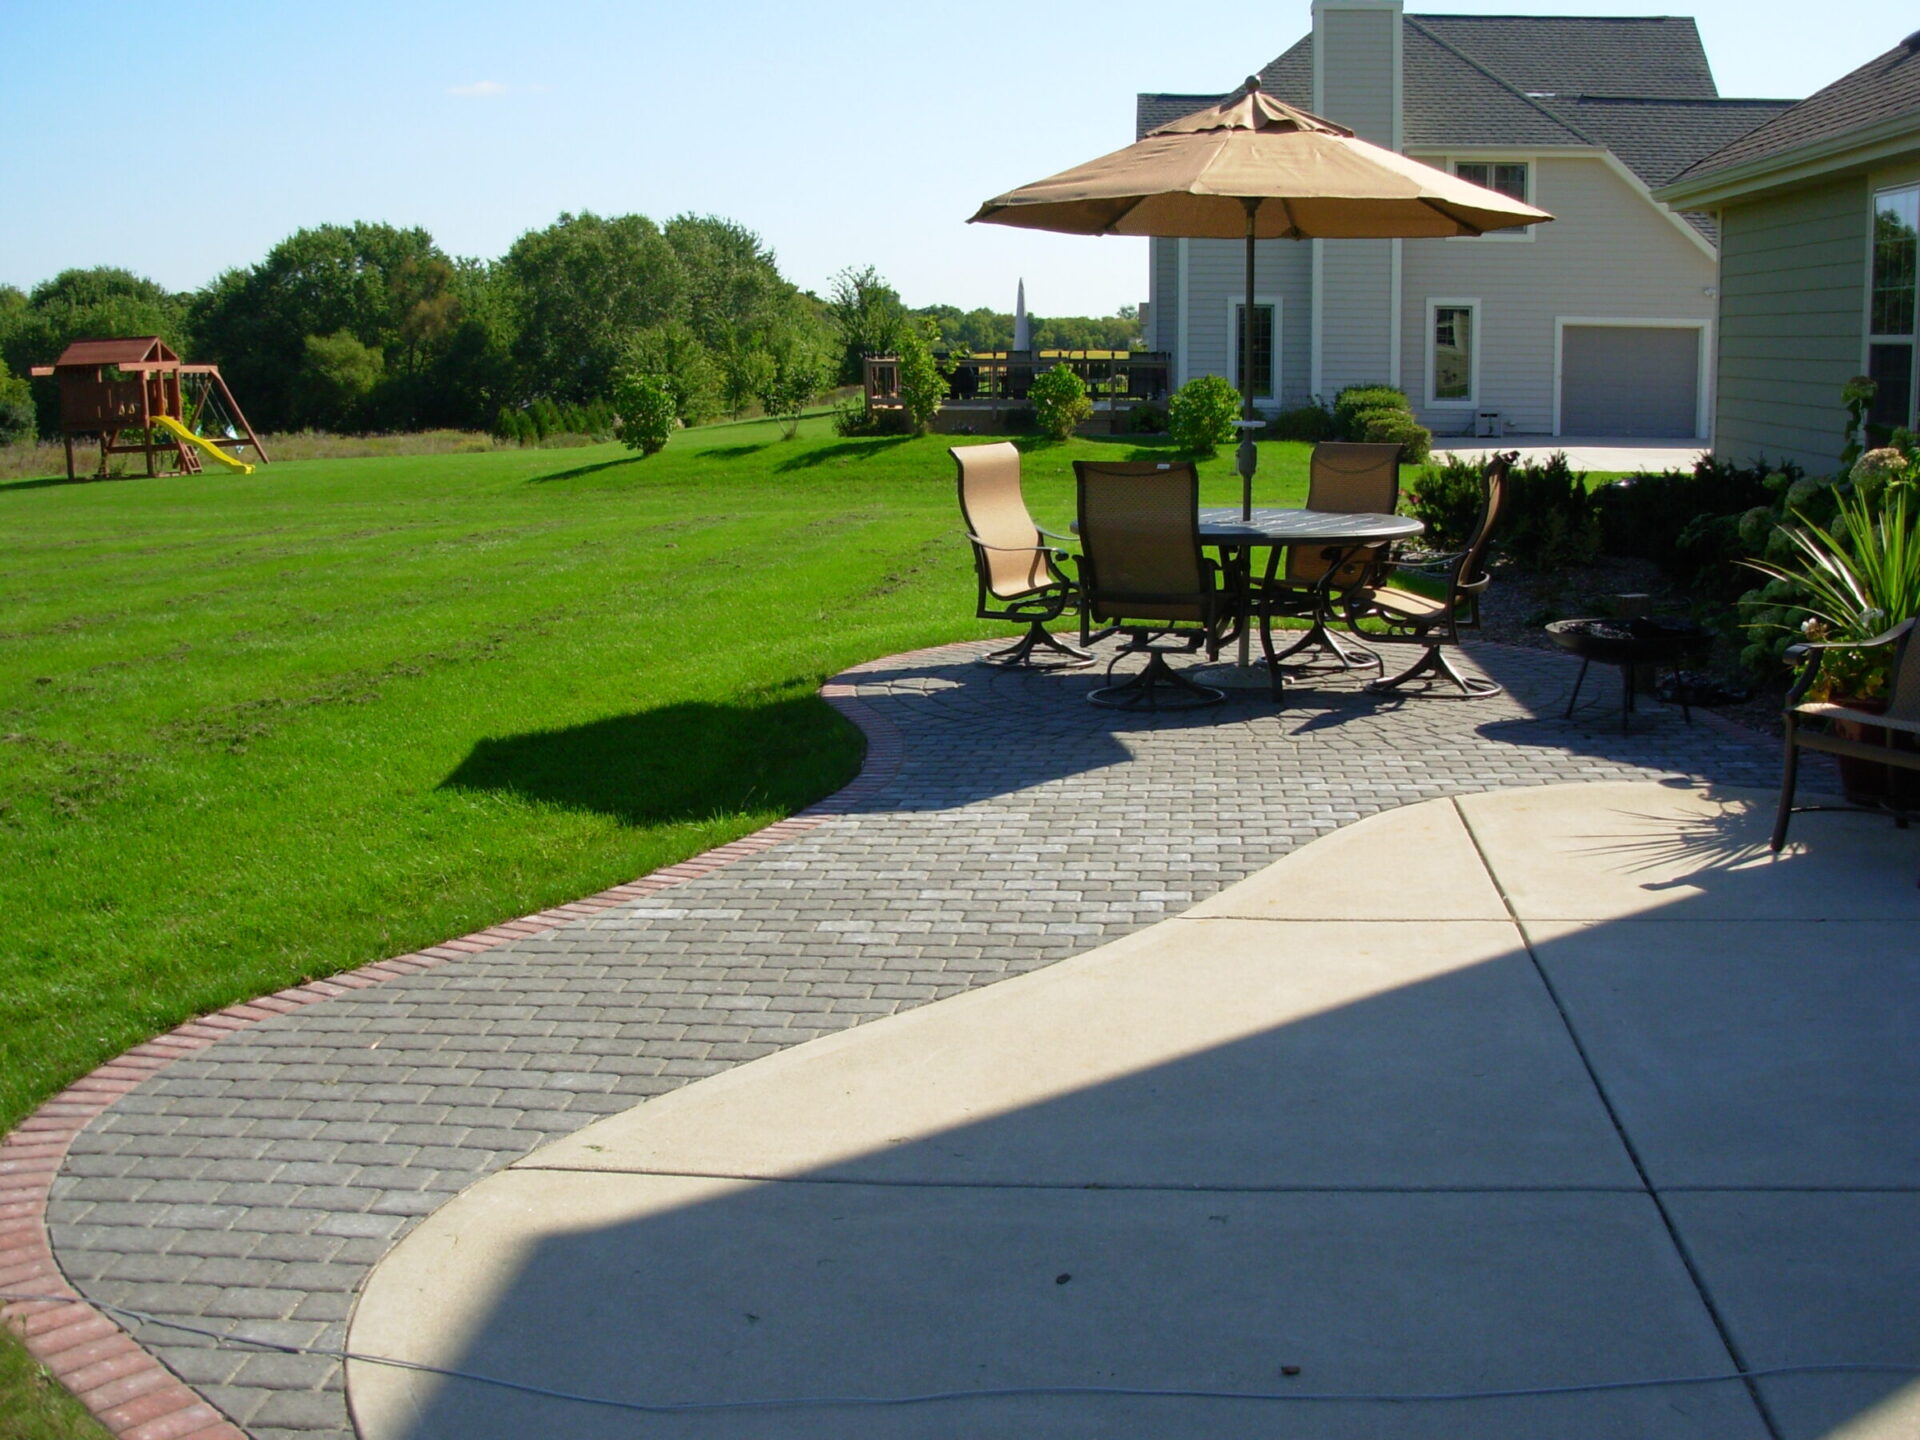 This image shows a backyard with a paved patio, outdoor dining set under an umbrella, a play structure, well-kept lawn, and a house.